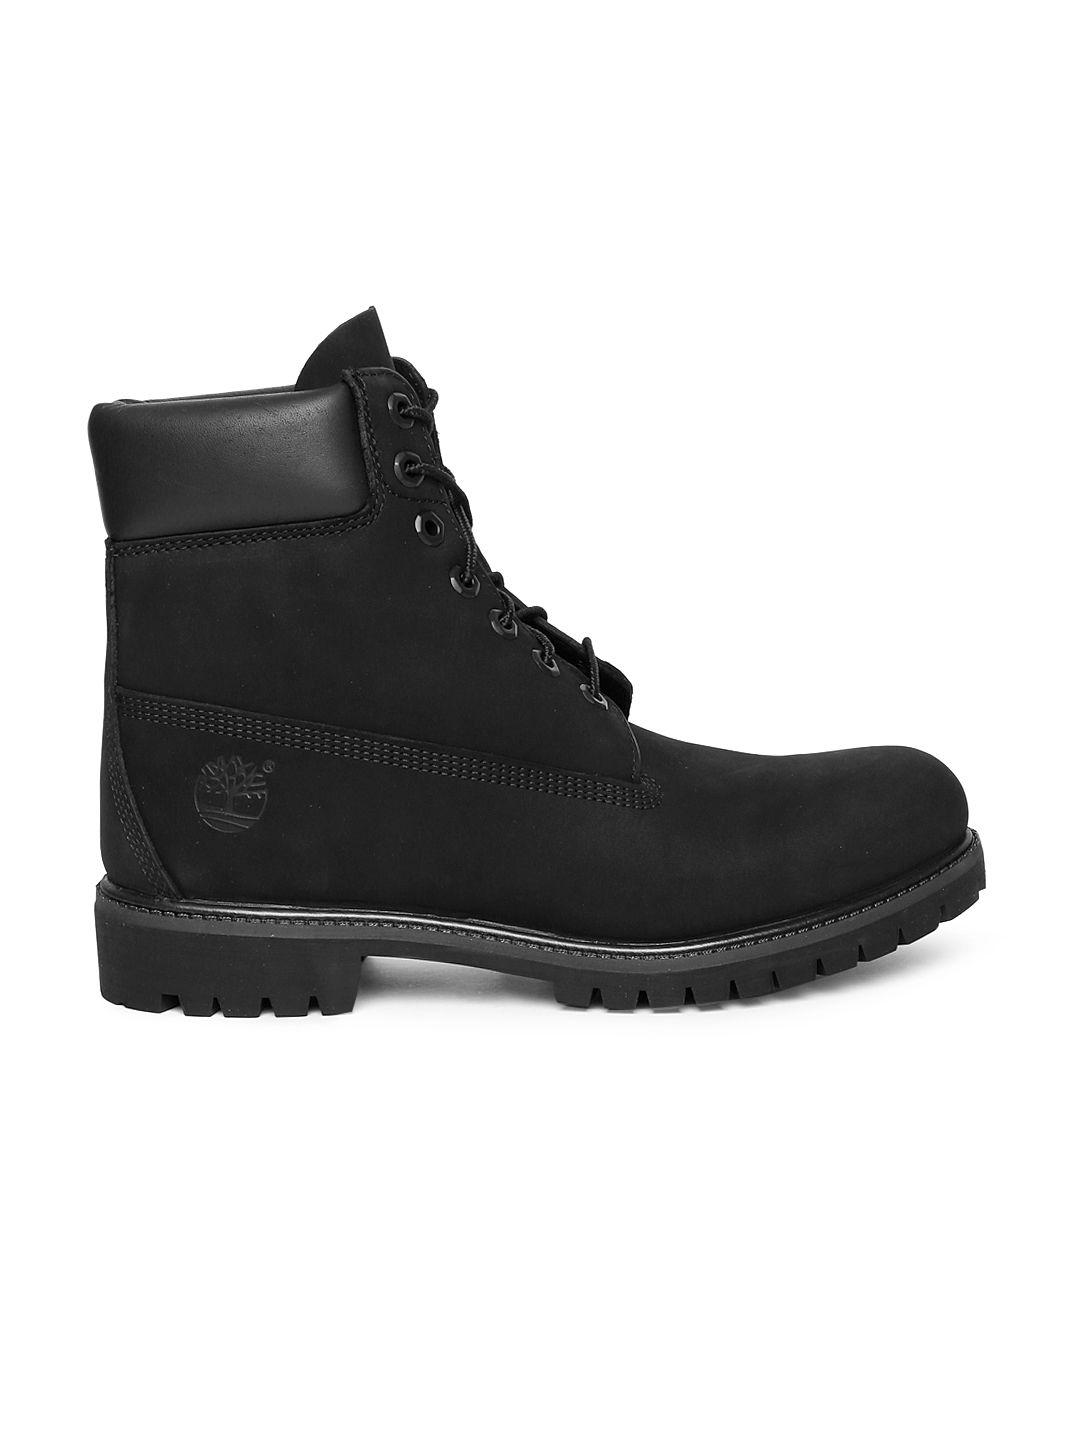 timberland-men-black-solid-suede-high-top-flat-boots